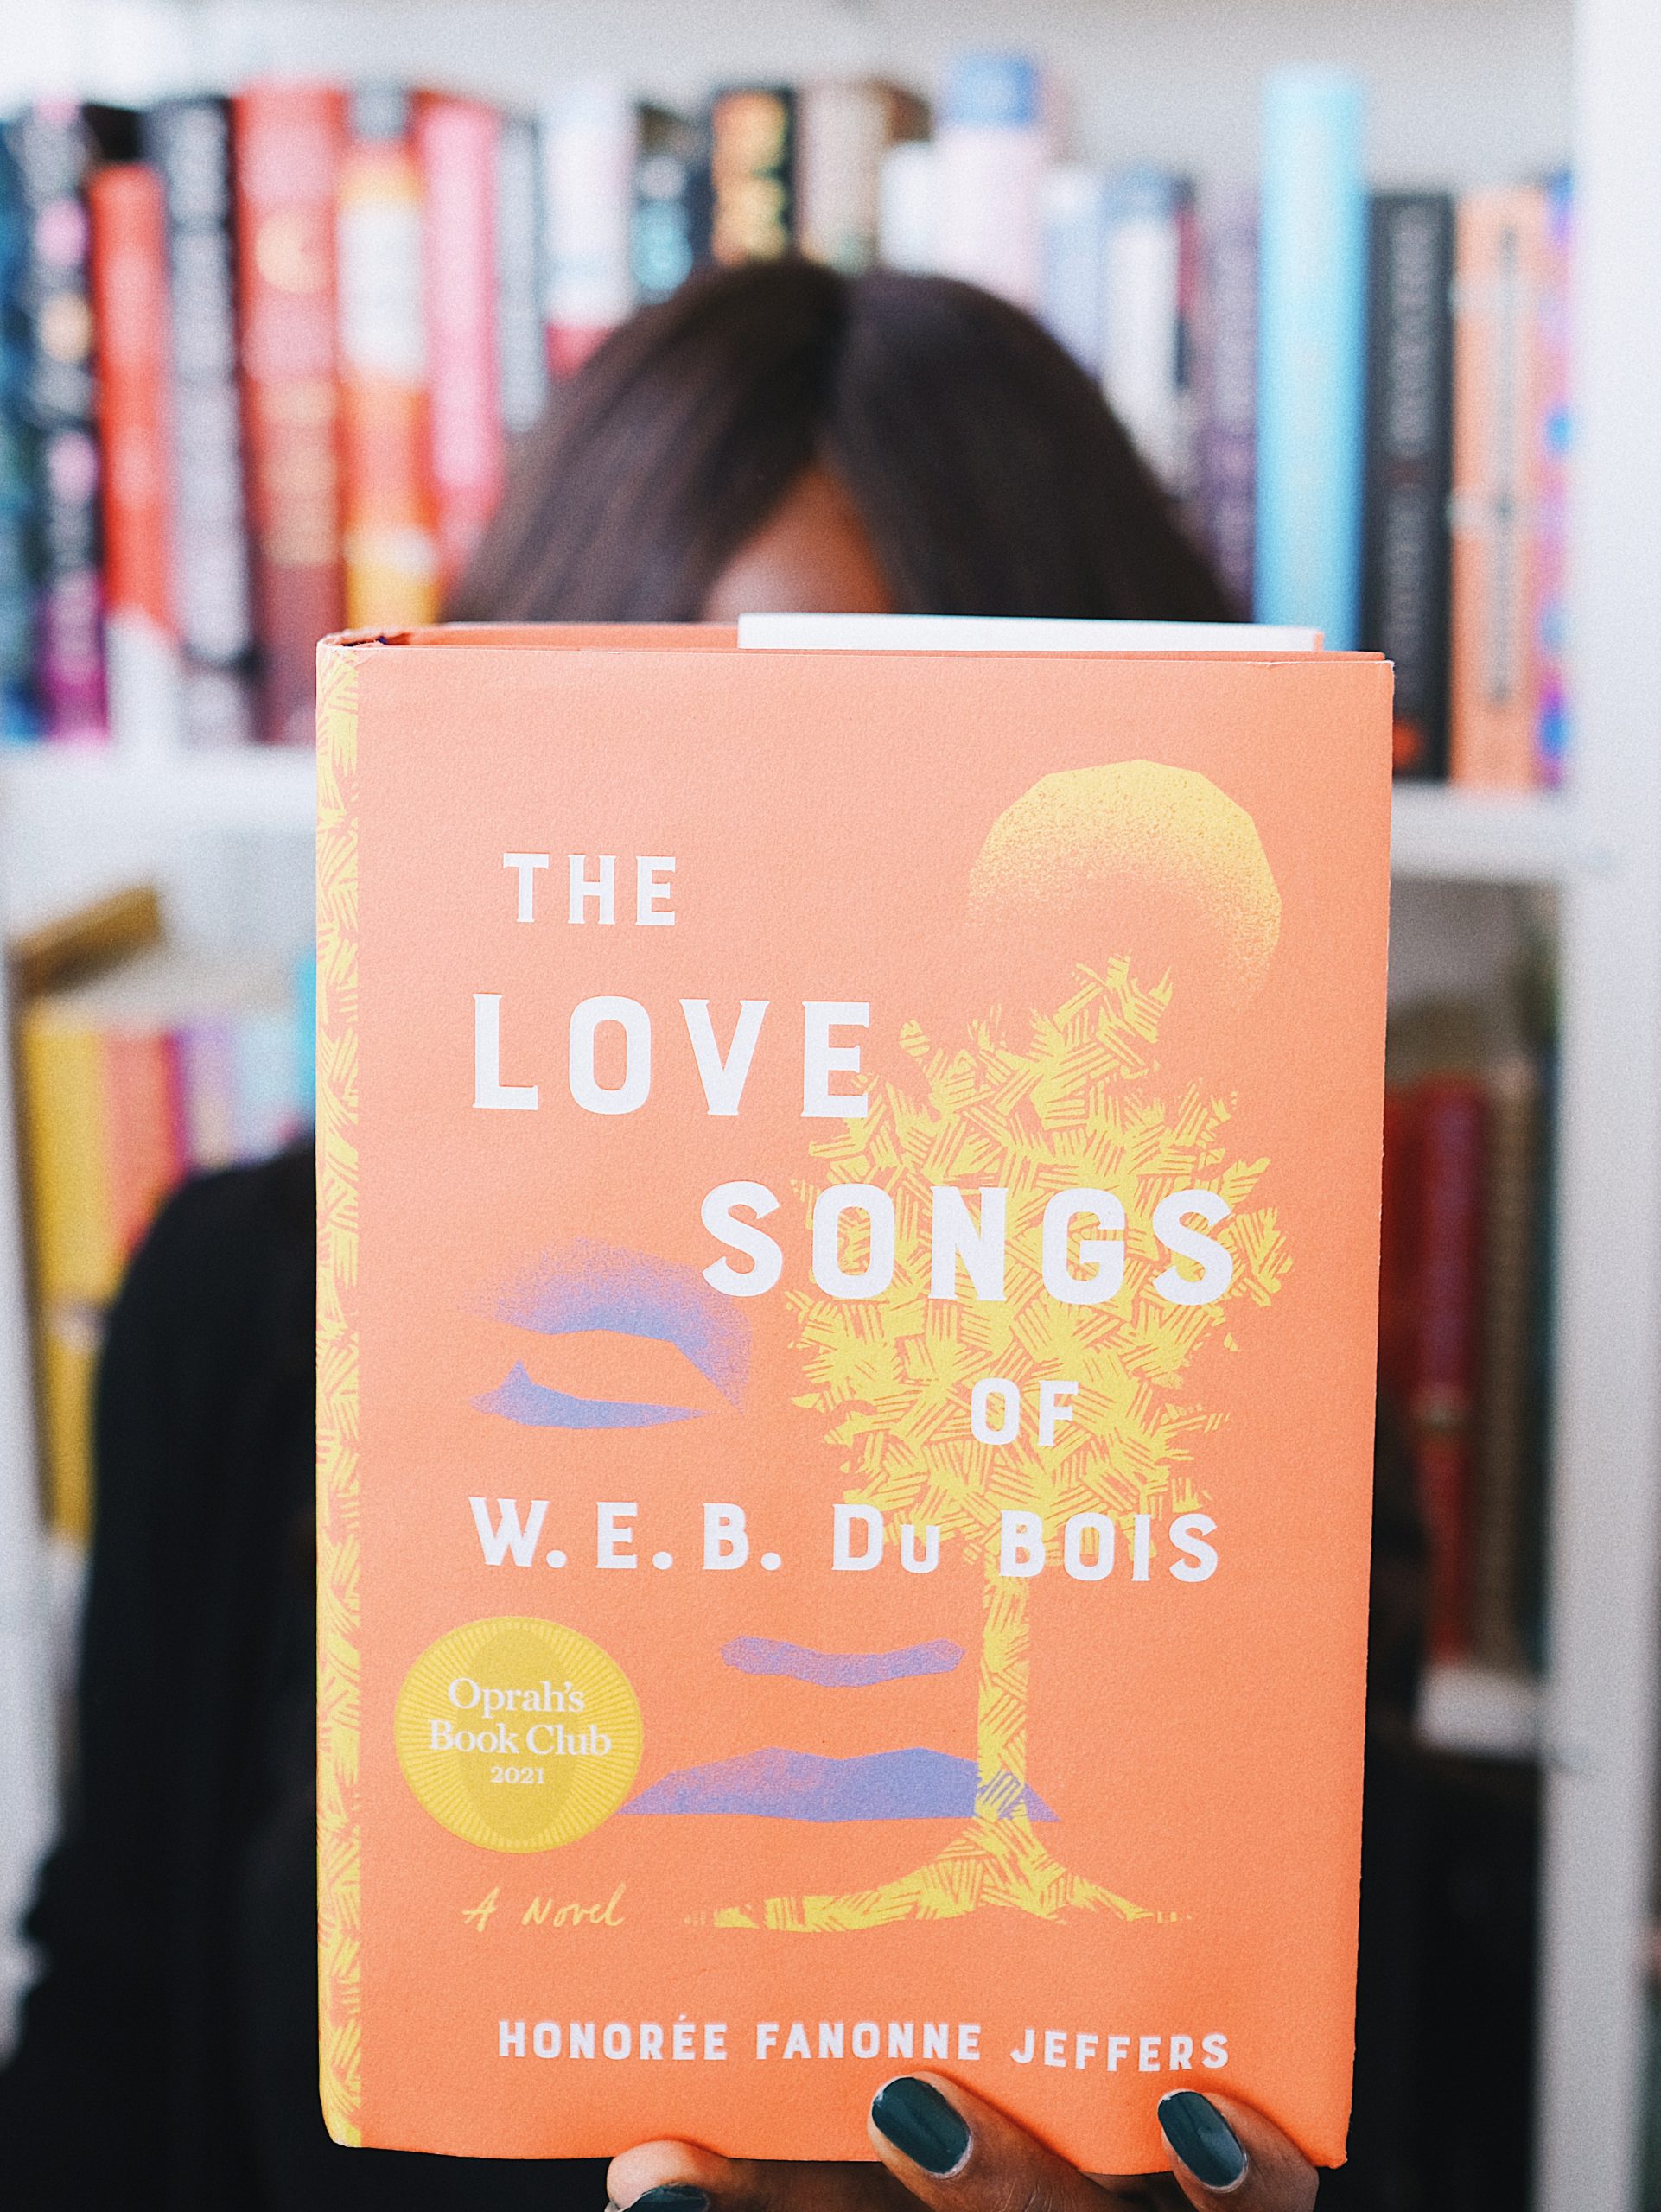 The Love Songs of W. E. B. Du Bois review, book review, oprah's book club, the love songs review